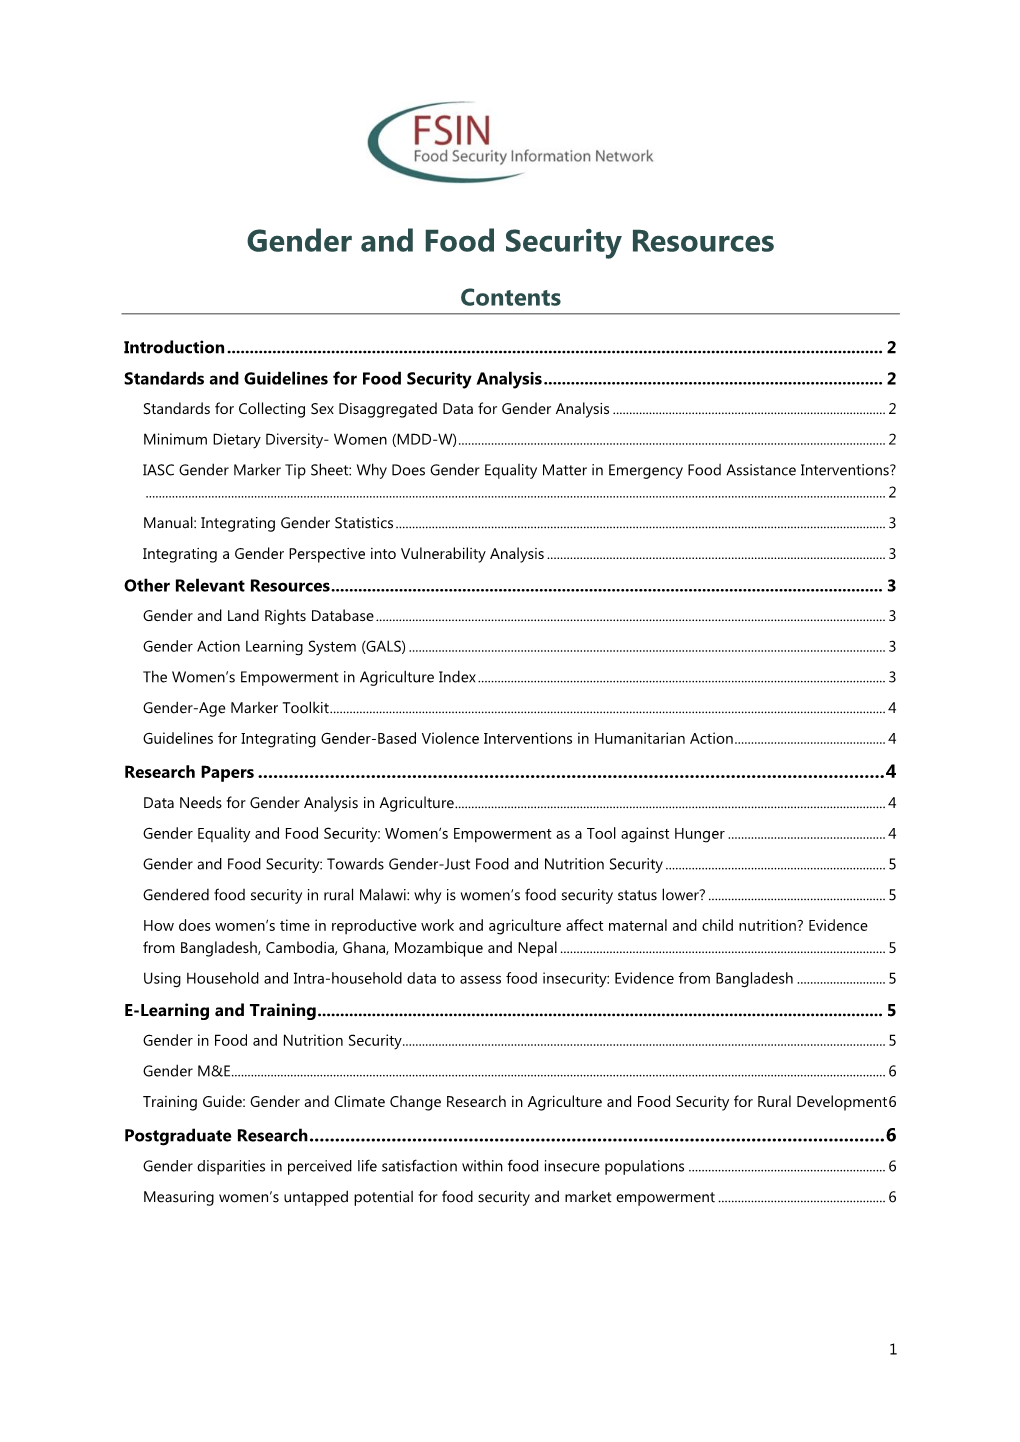 Gender and Food Security Resources